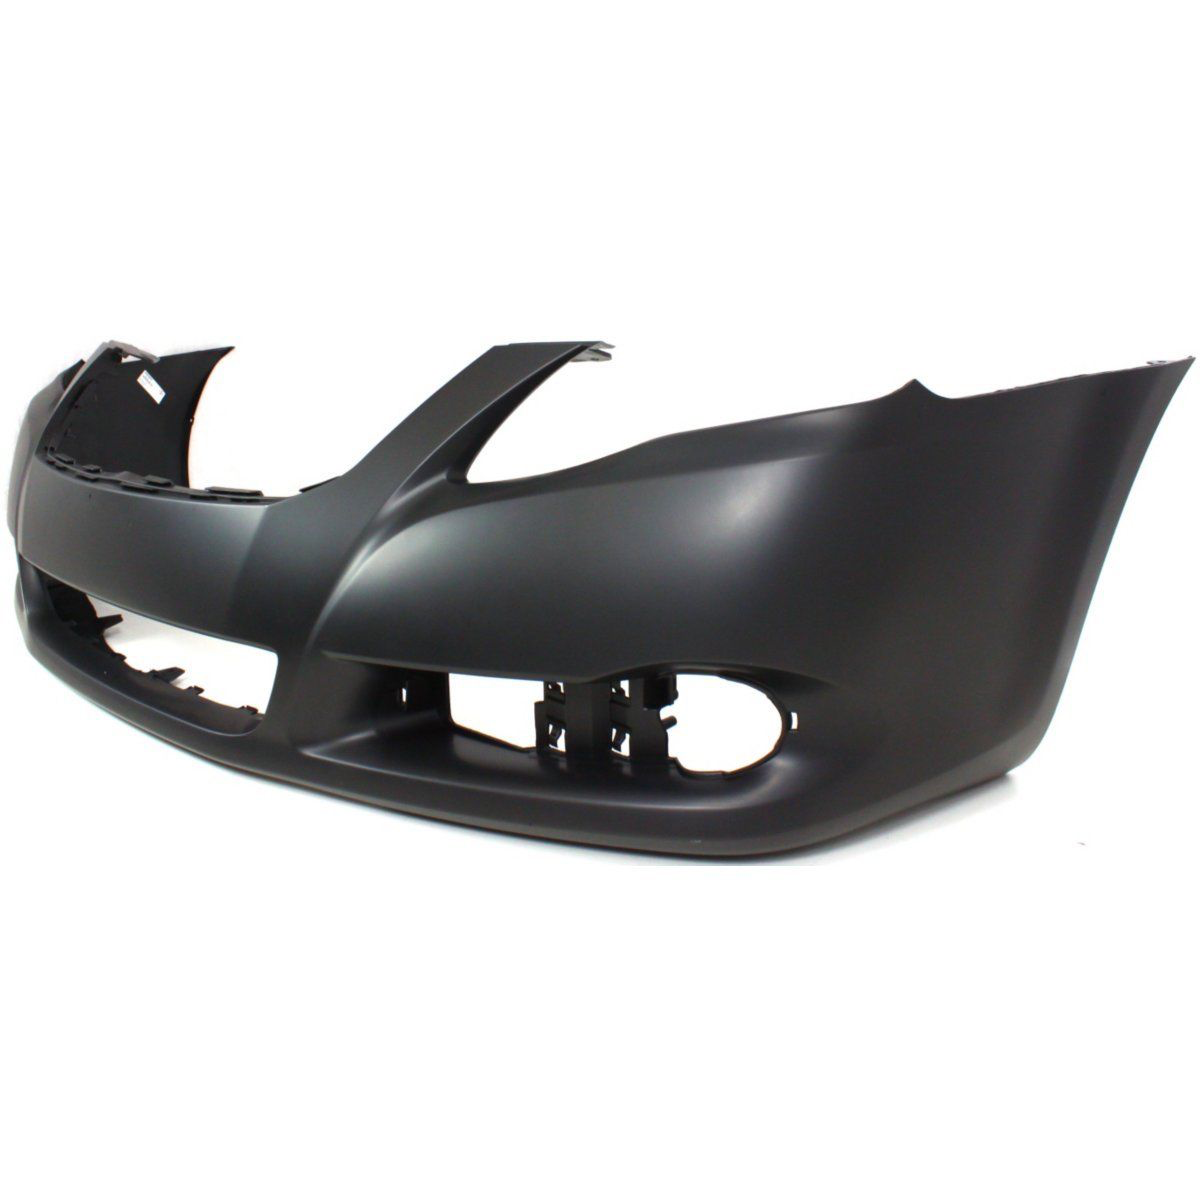 2008-2010 TOYOTA AVALON Front Bumper Cover Painted to Match